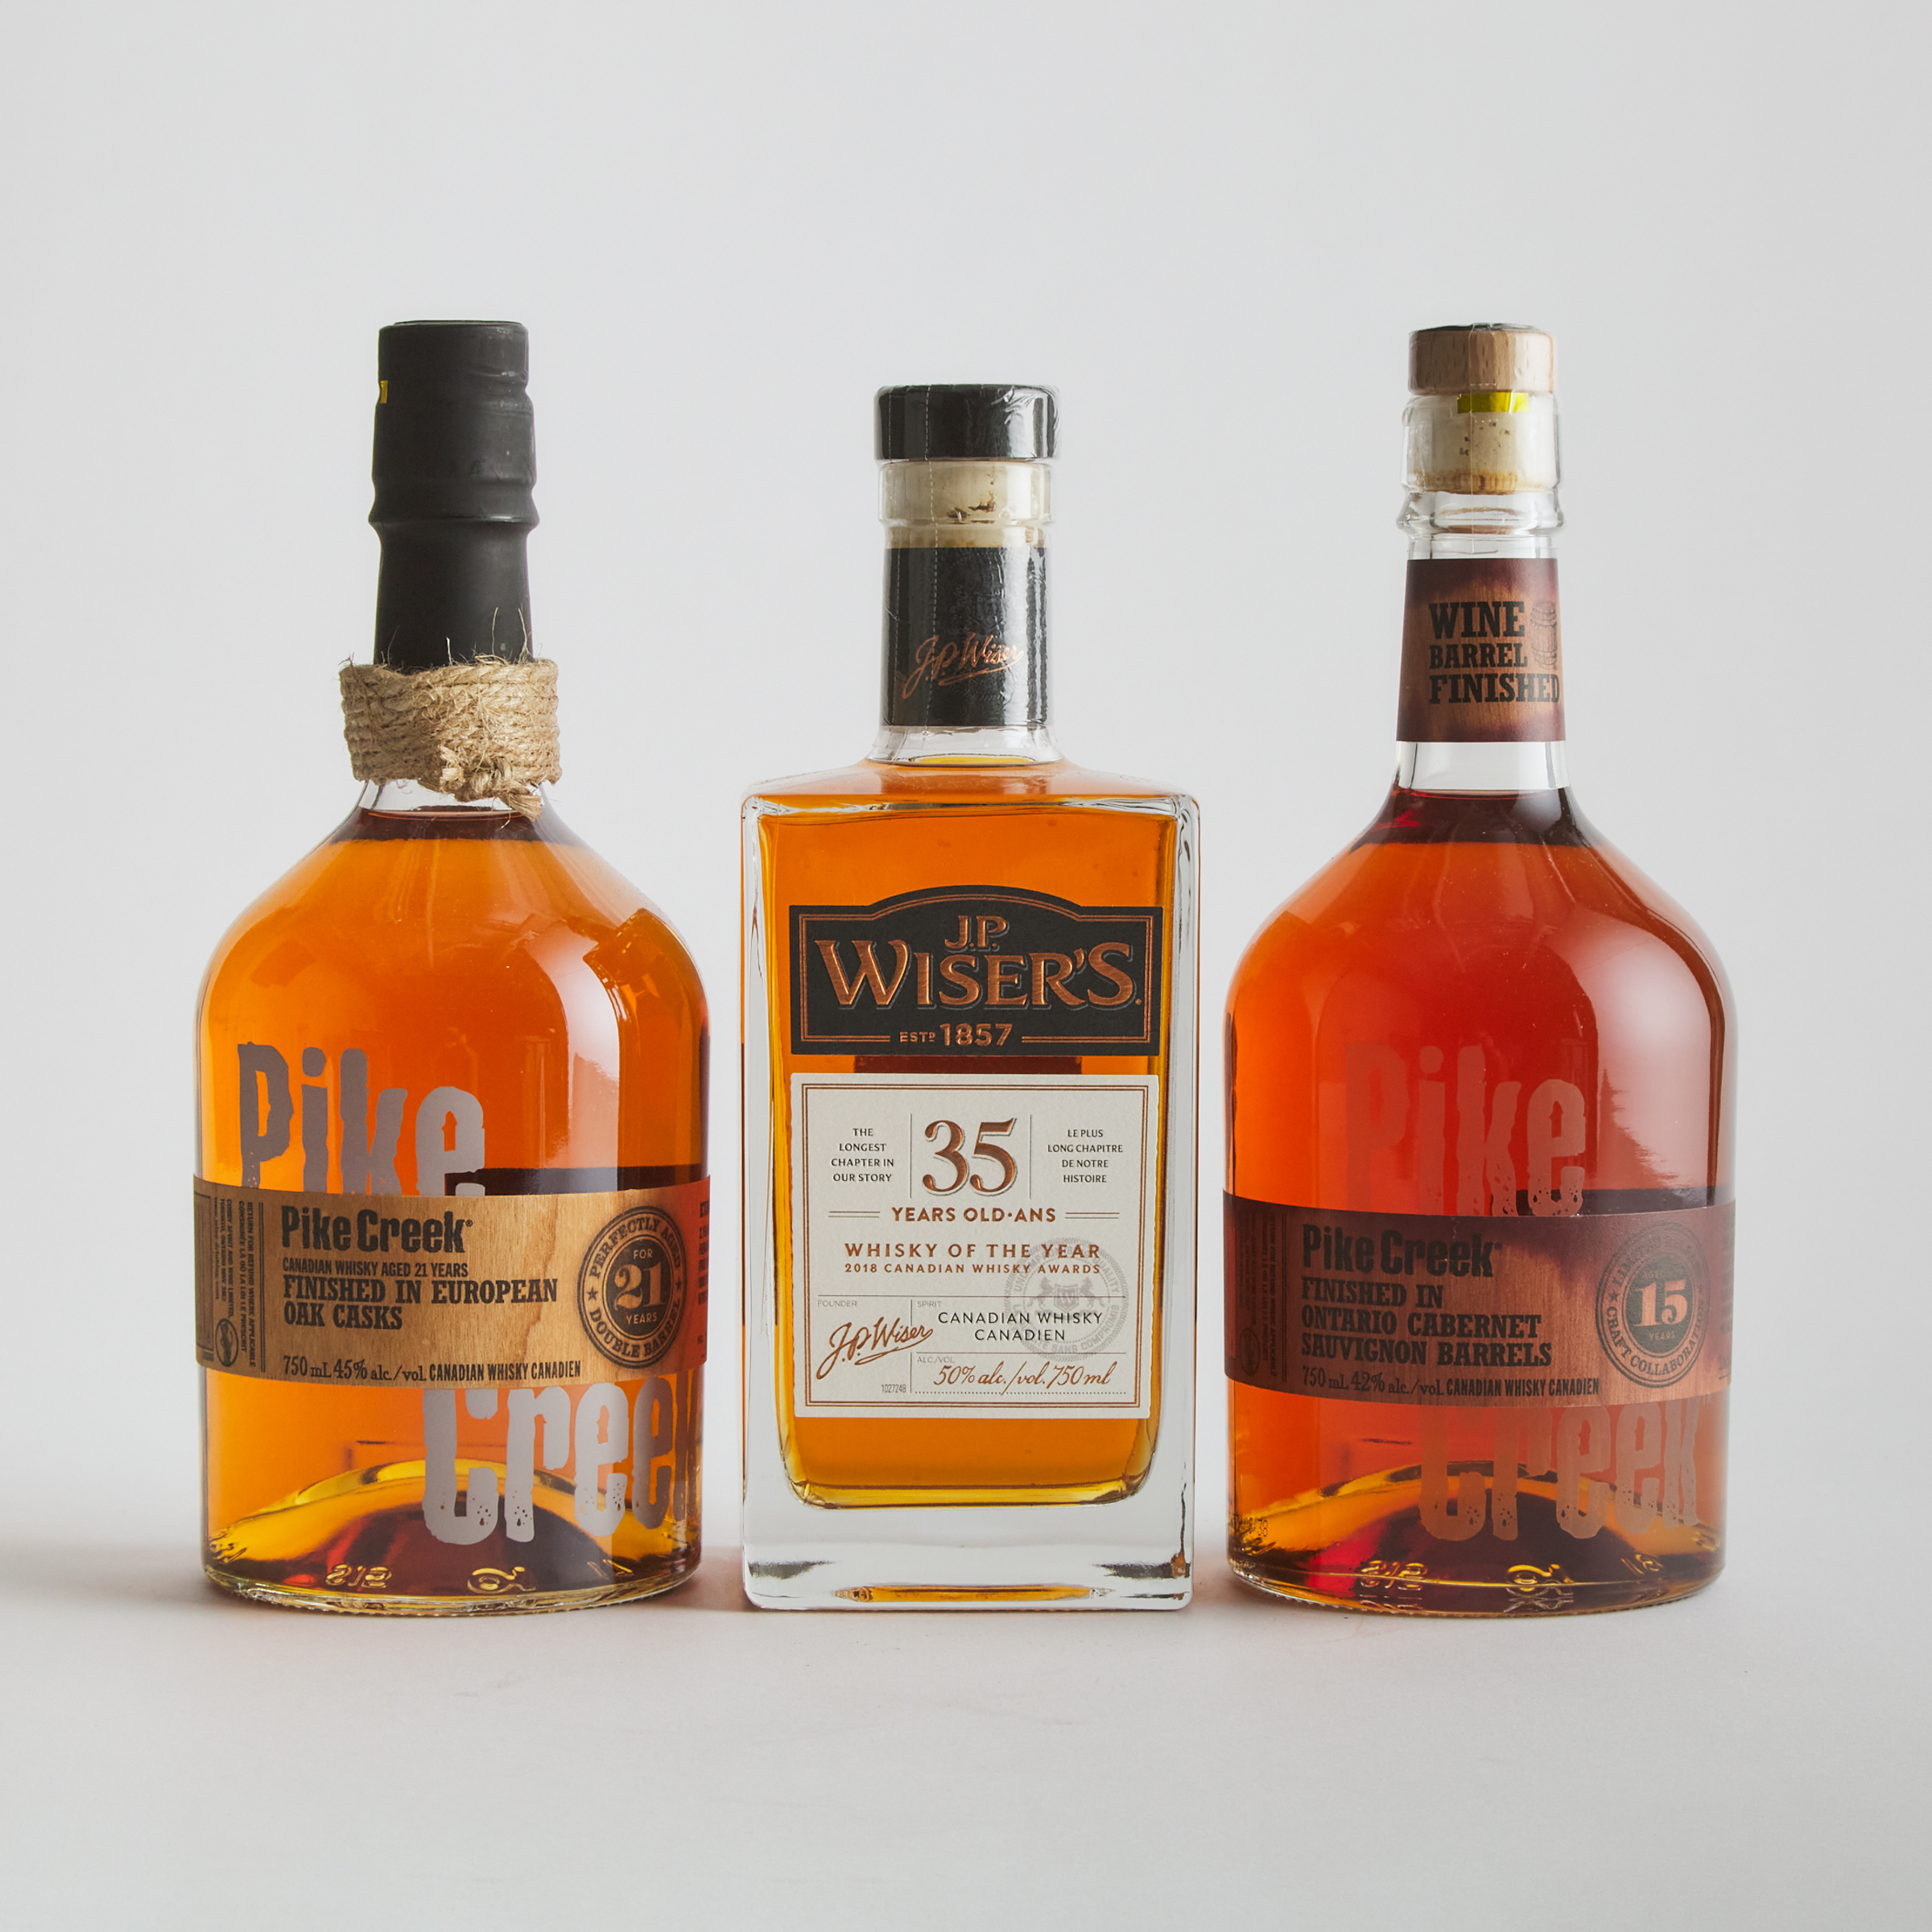 J.P. WISER'S CANADIAN WHISKY 35 YEARS (ONE 750 ML)
PIKE CREEK CANADIAN WHISKY 21 YEARS (ONE 750 ML)
PIKE CREEK CANADIAN WHISKY 15 YEARS (ONE 750 ML)